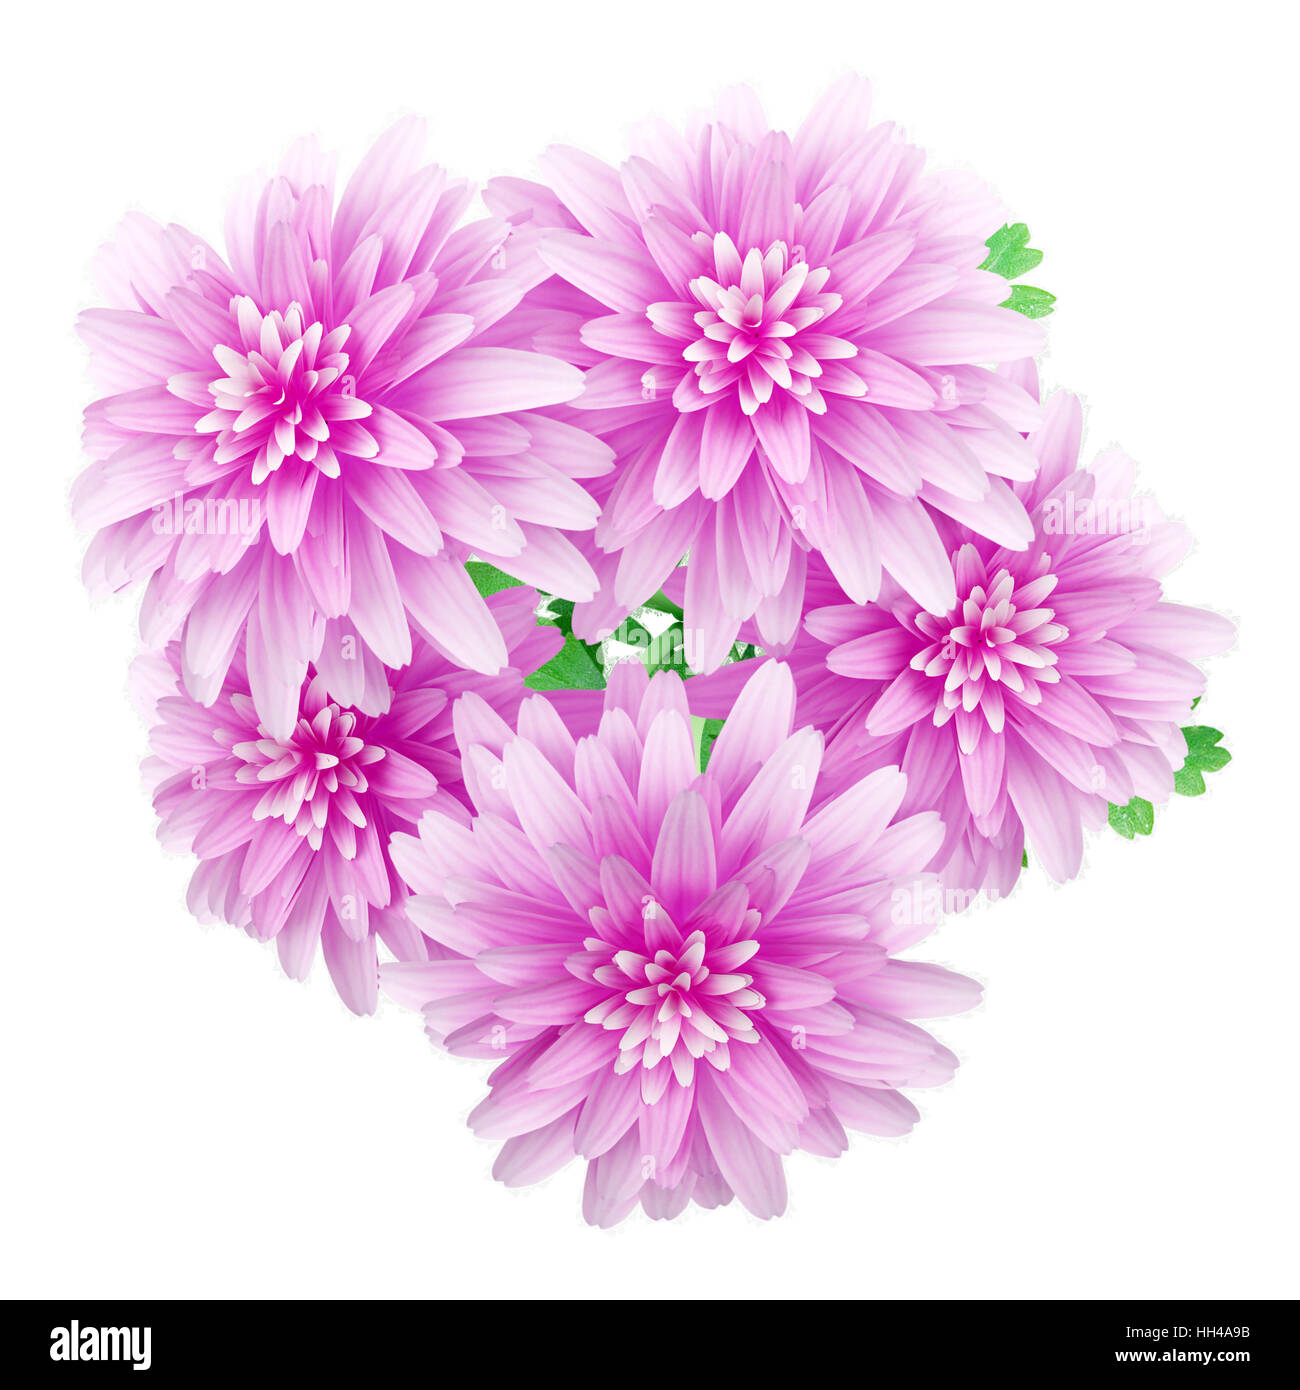 top view of pink chrysanthemum flower isolated on white background Stock Photo